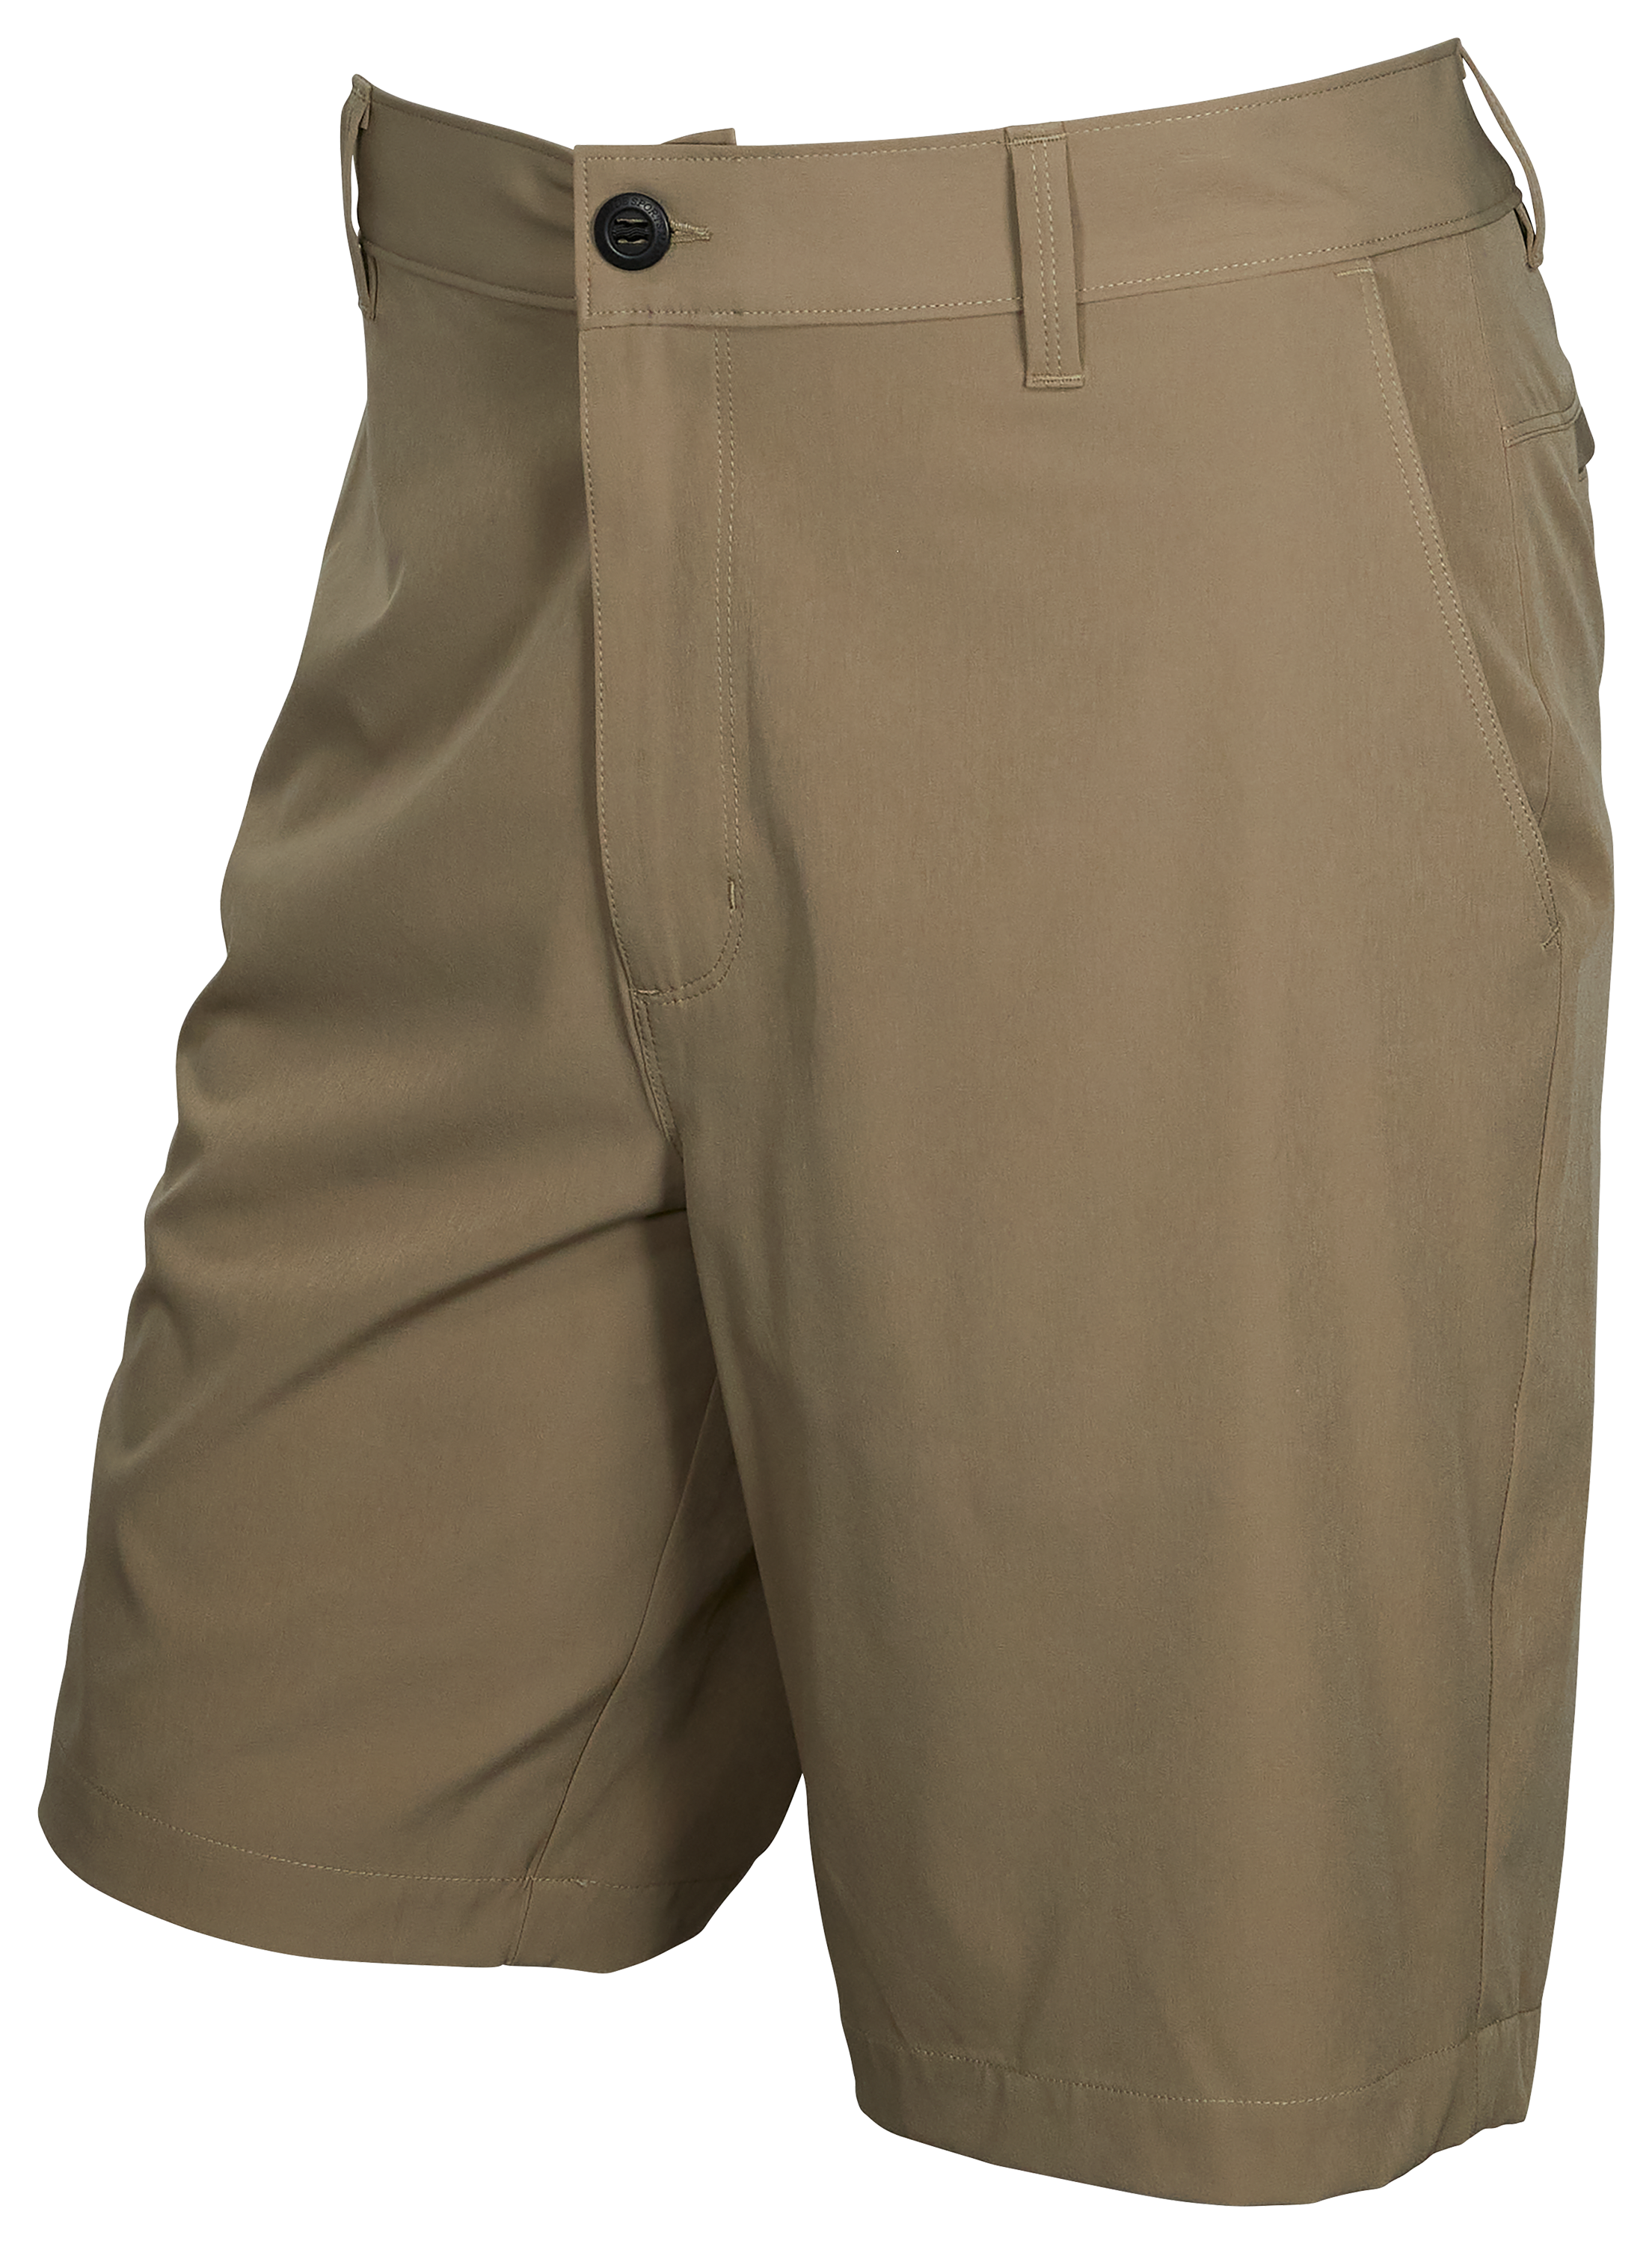 World Wide Sportsman Pescador Stretch Fishing Shorts for Men - Timber - 32